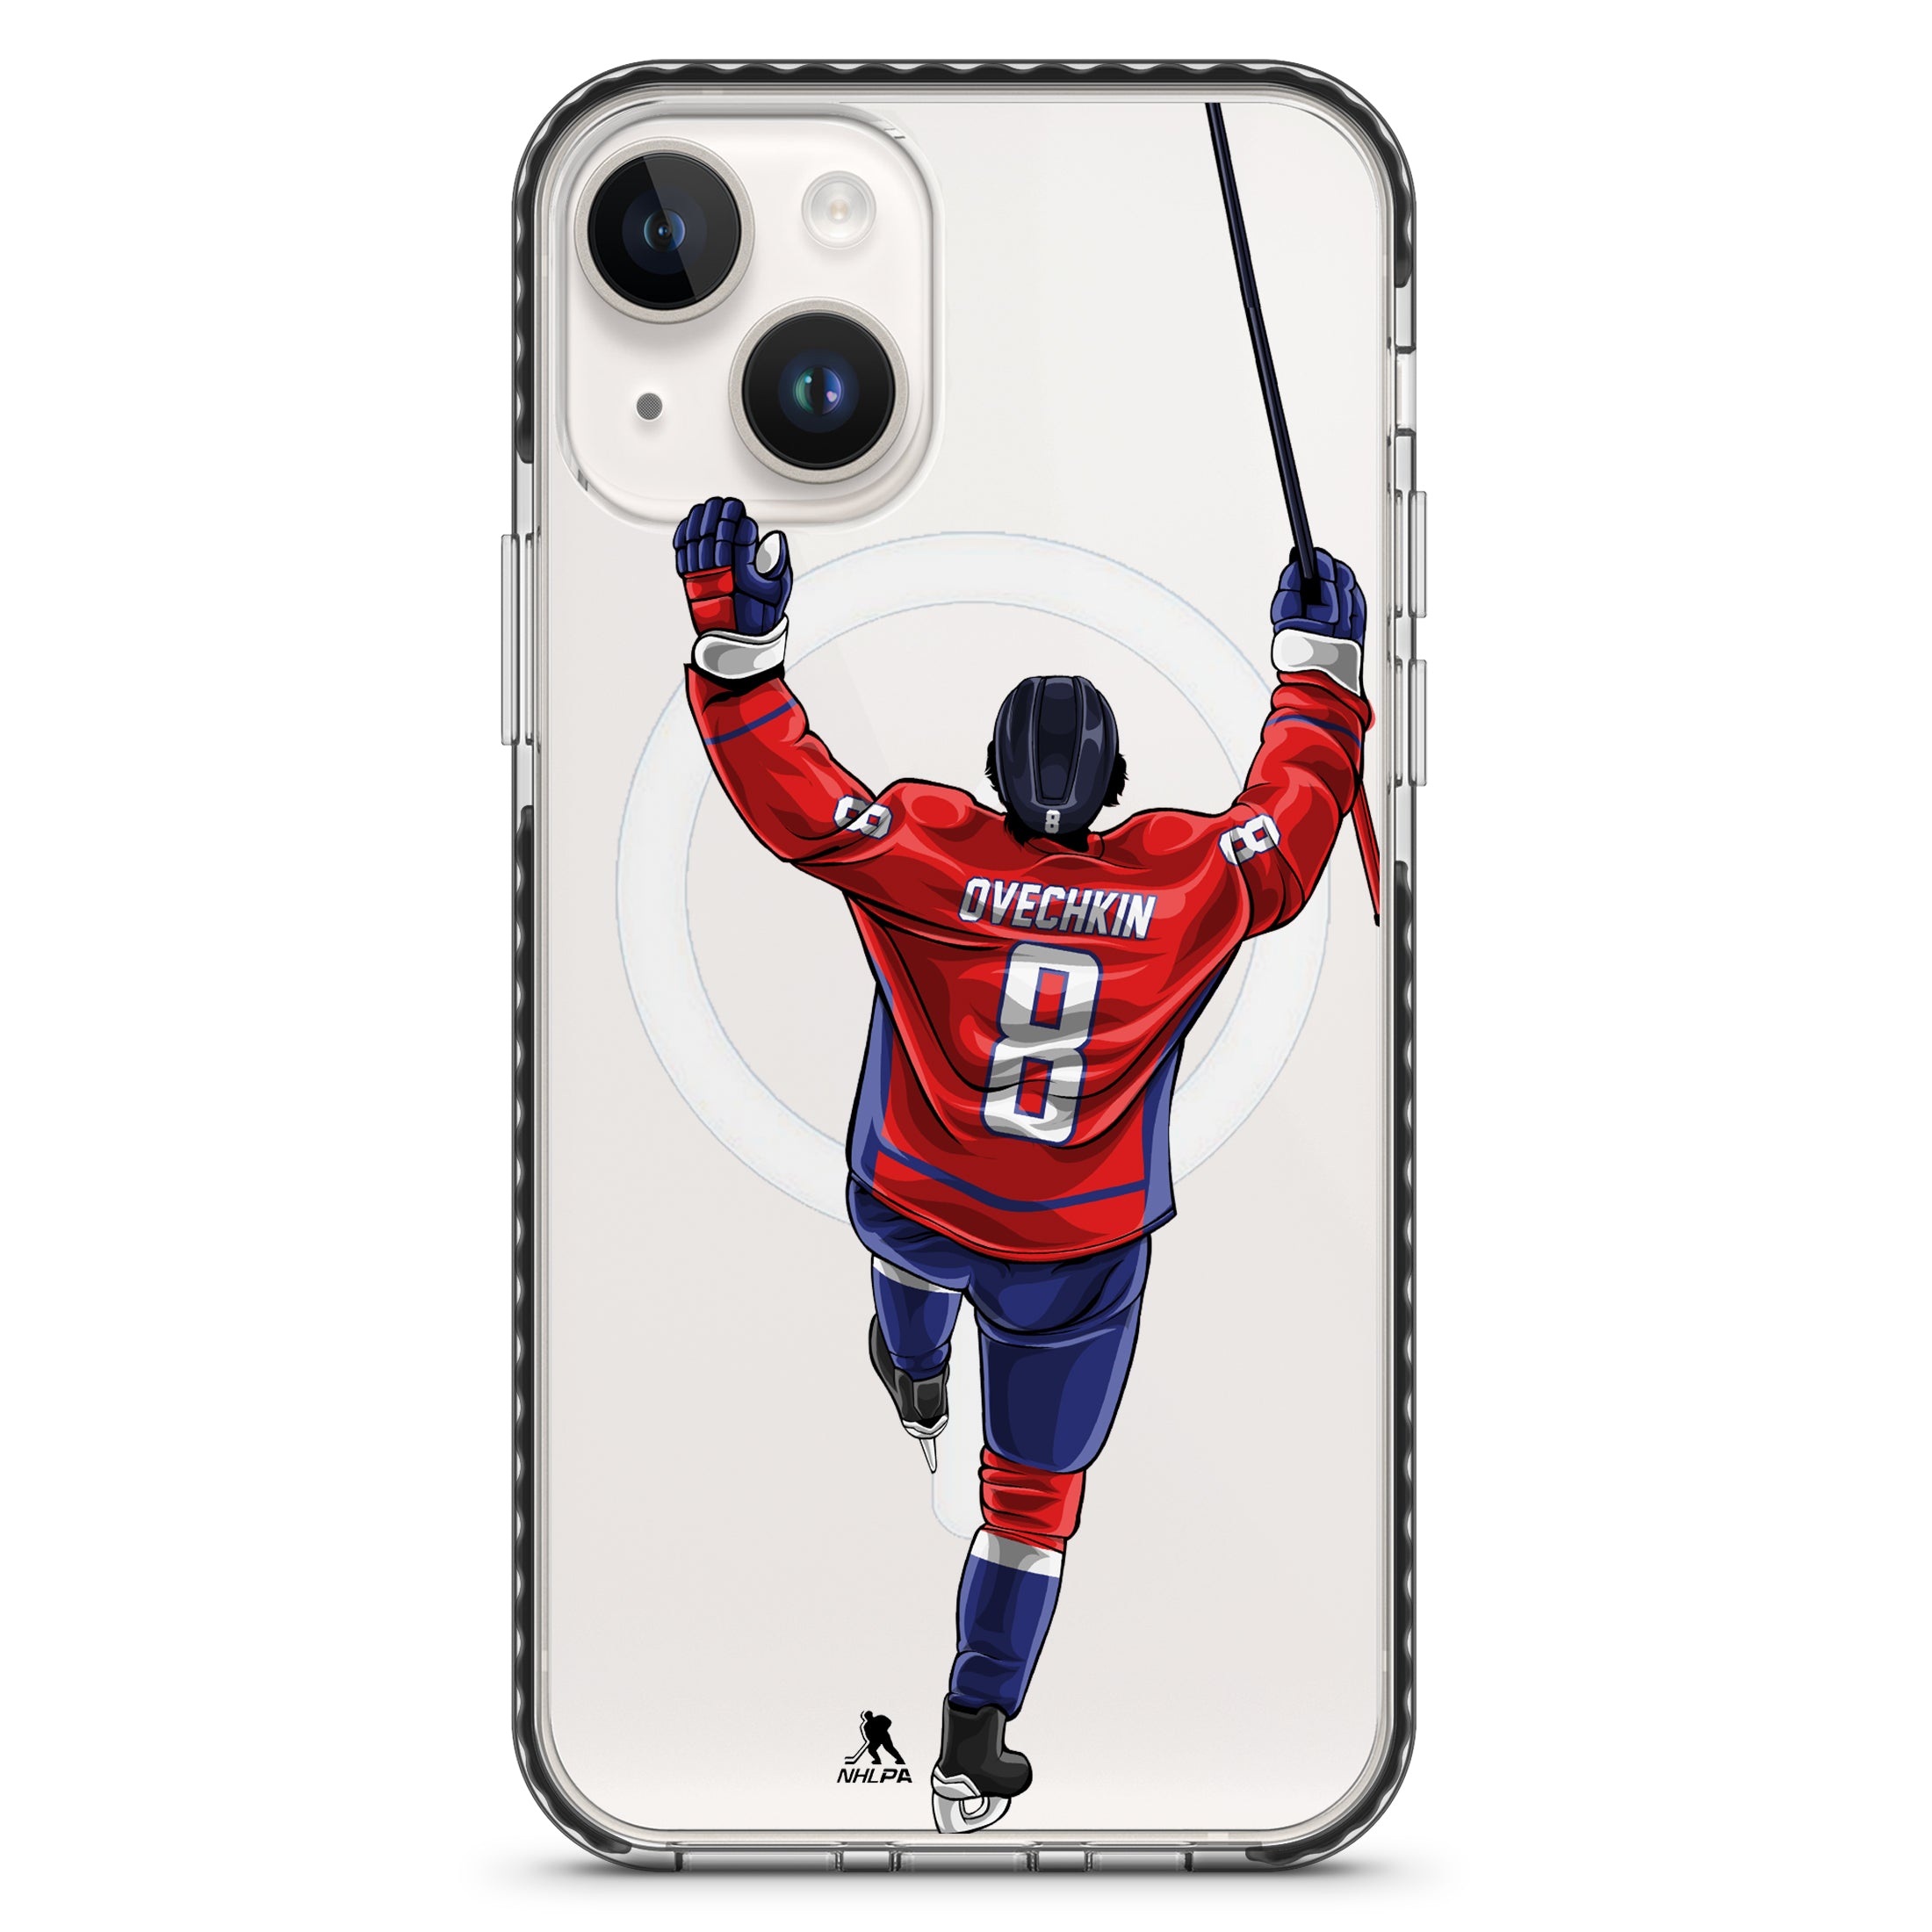 Ovechkin Clear Series 2.0 Phone Case